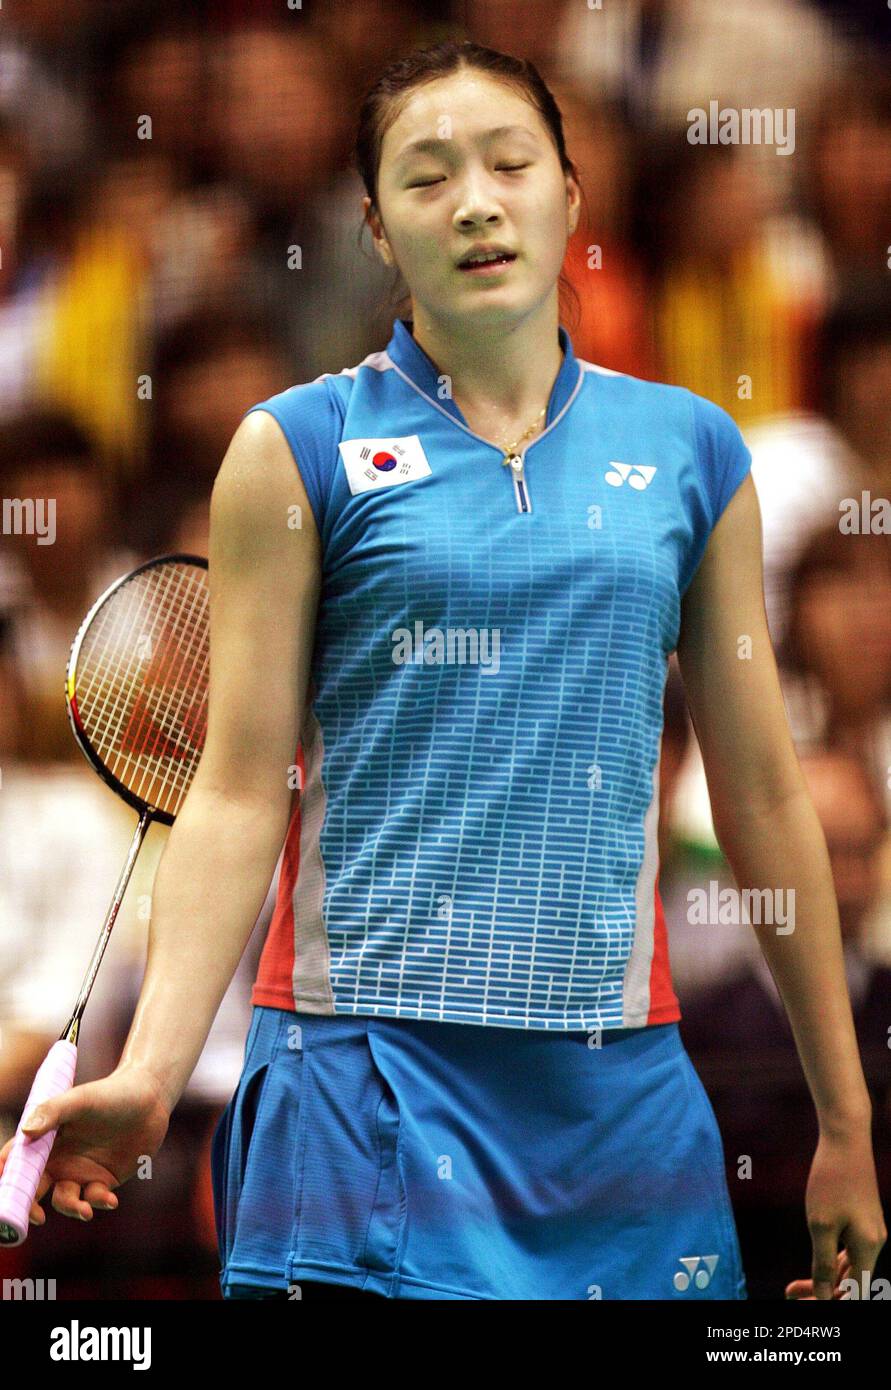 South Koreas Hwang Hye-youn reacts after missing a shot against Taiwans Cheng Shao Chieh during their quarter-finals match in the Yonex Thomas and Uber Cup badminton championships in Tokyo, Wednesday, May 3,